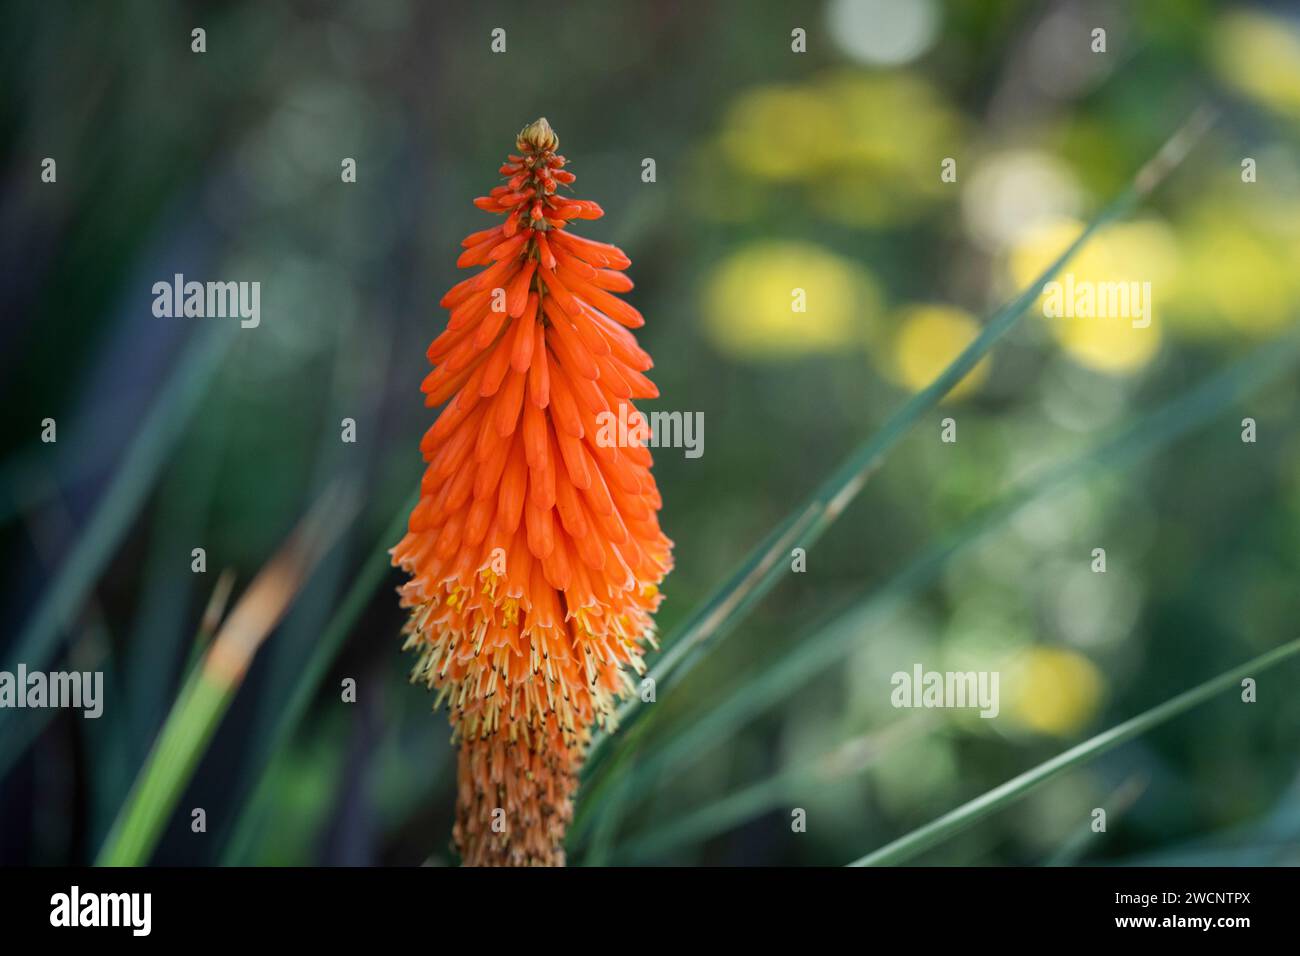 Closeup of tropical and vibrant orange flower.  Common name Red Hot Fire Poker.   Background out of focus. Stock Photo